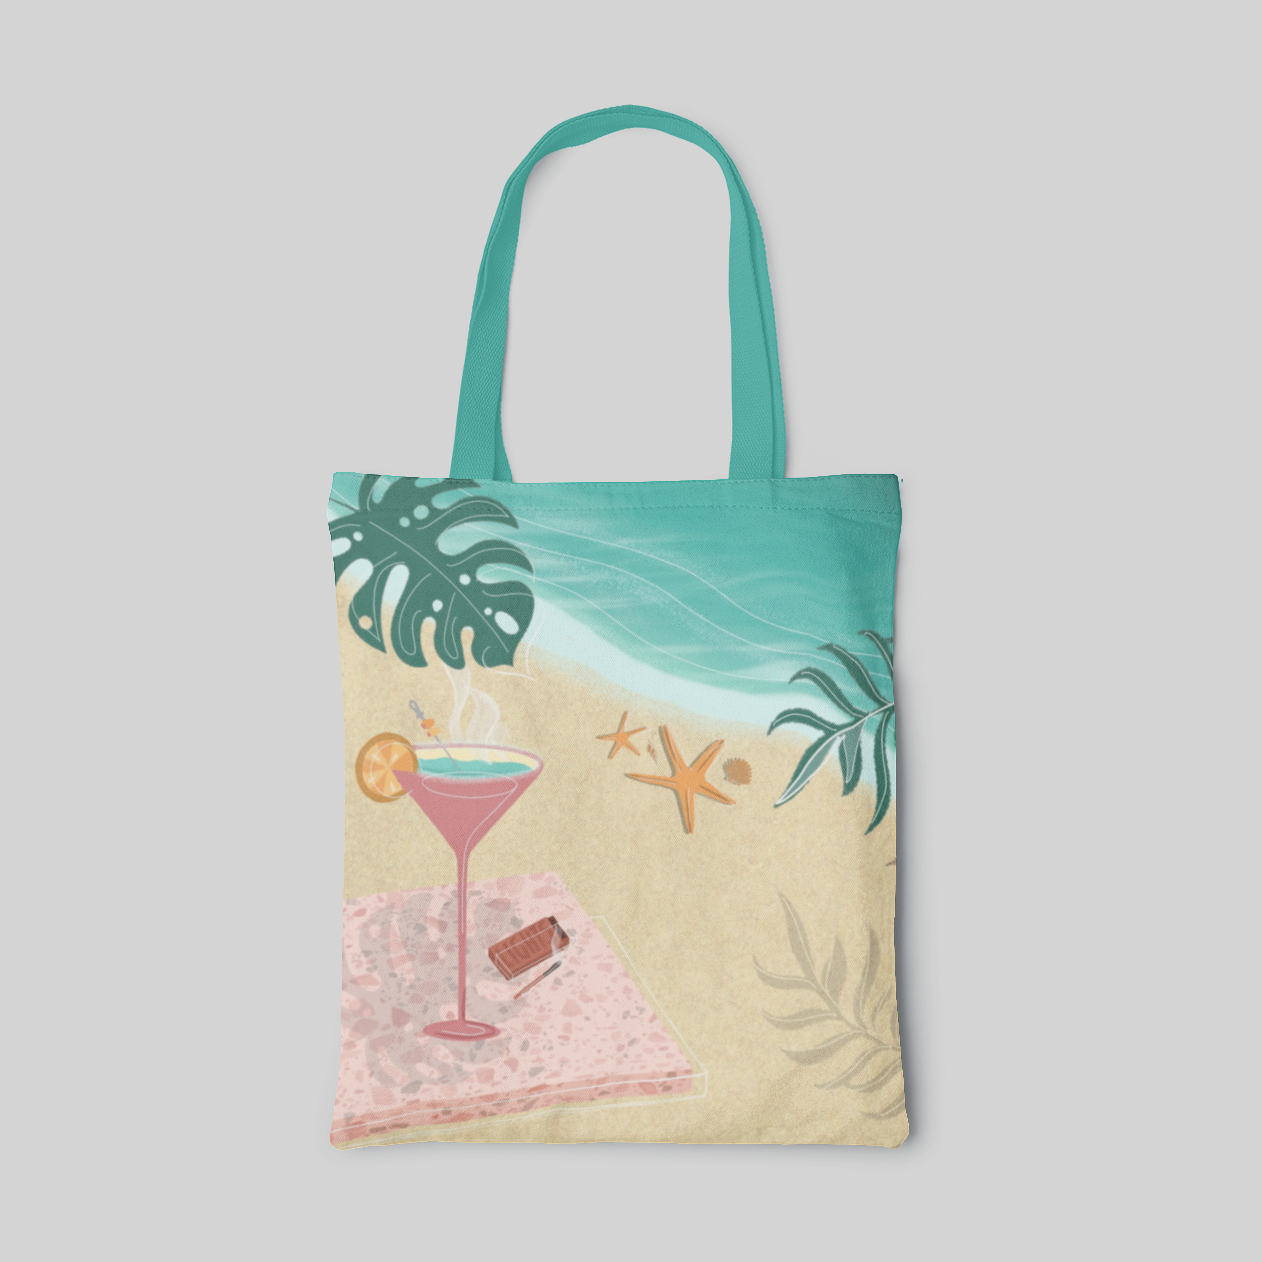 Tote bag with beach illustration print and martini glass